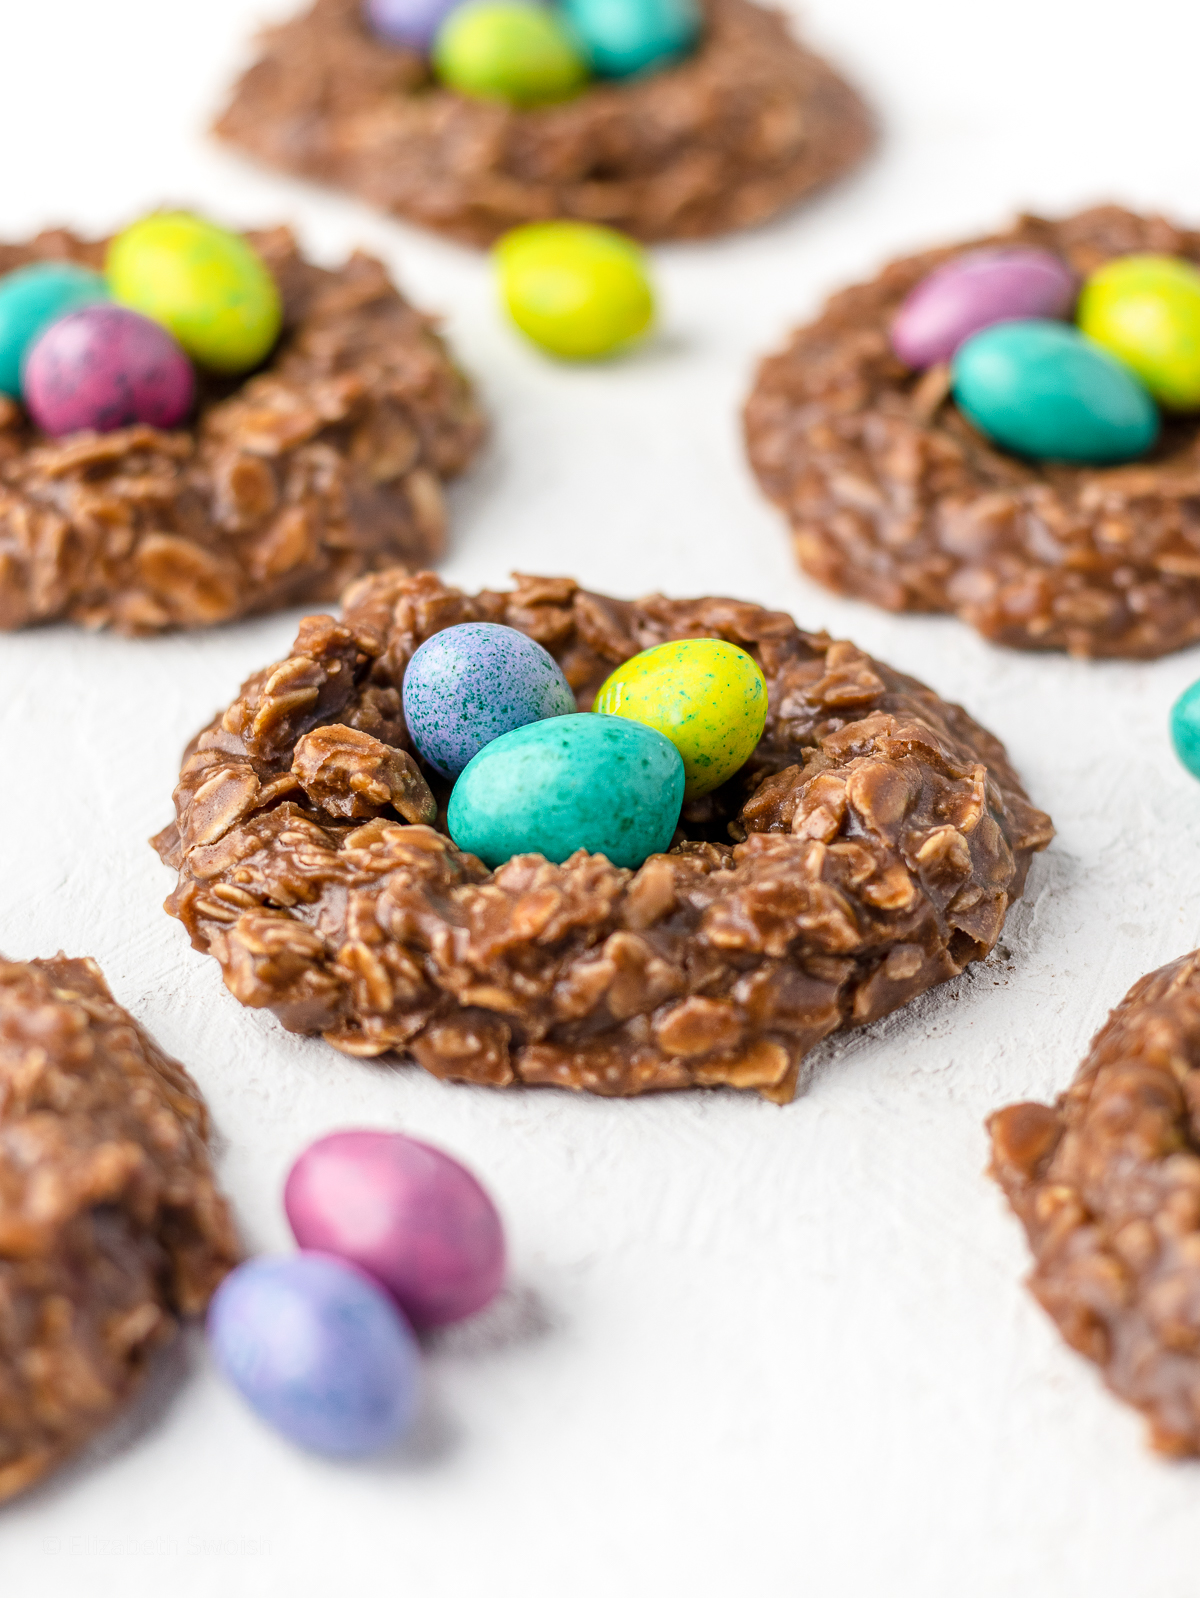 No bake birds nest cookies with 3 candy eggs in them.